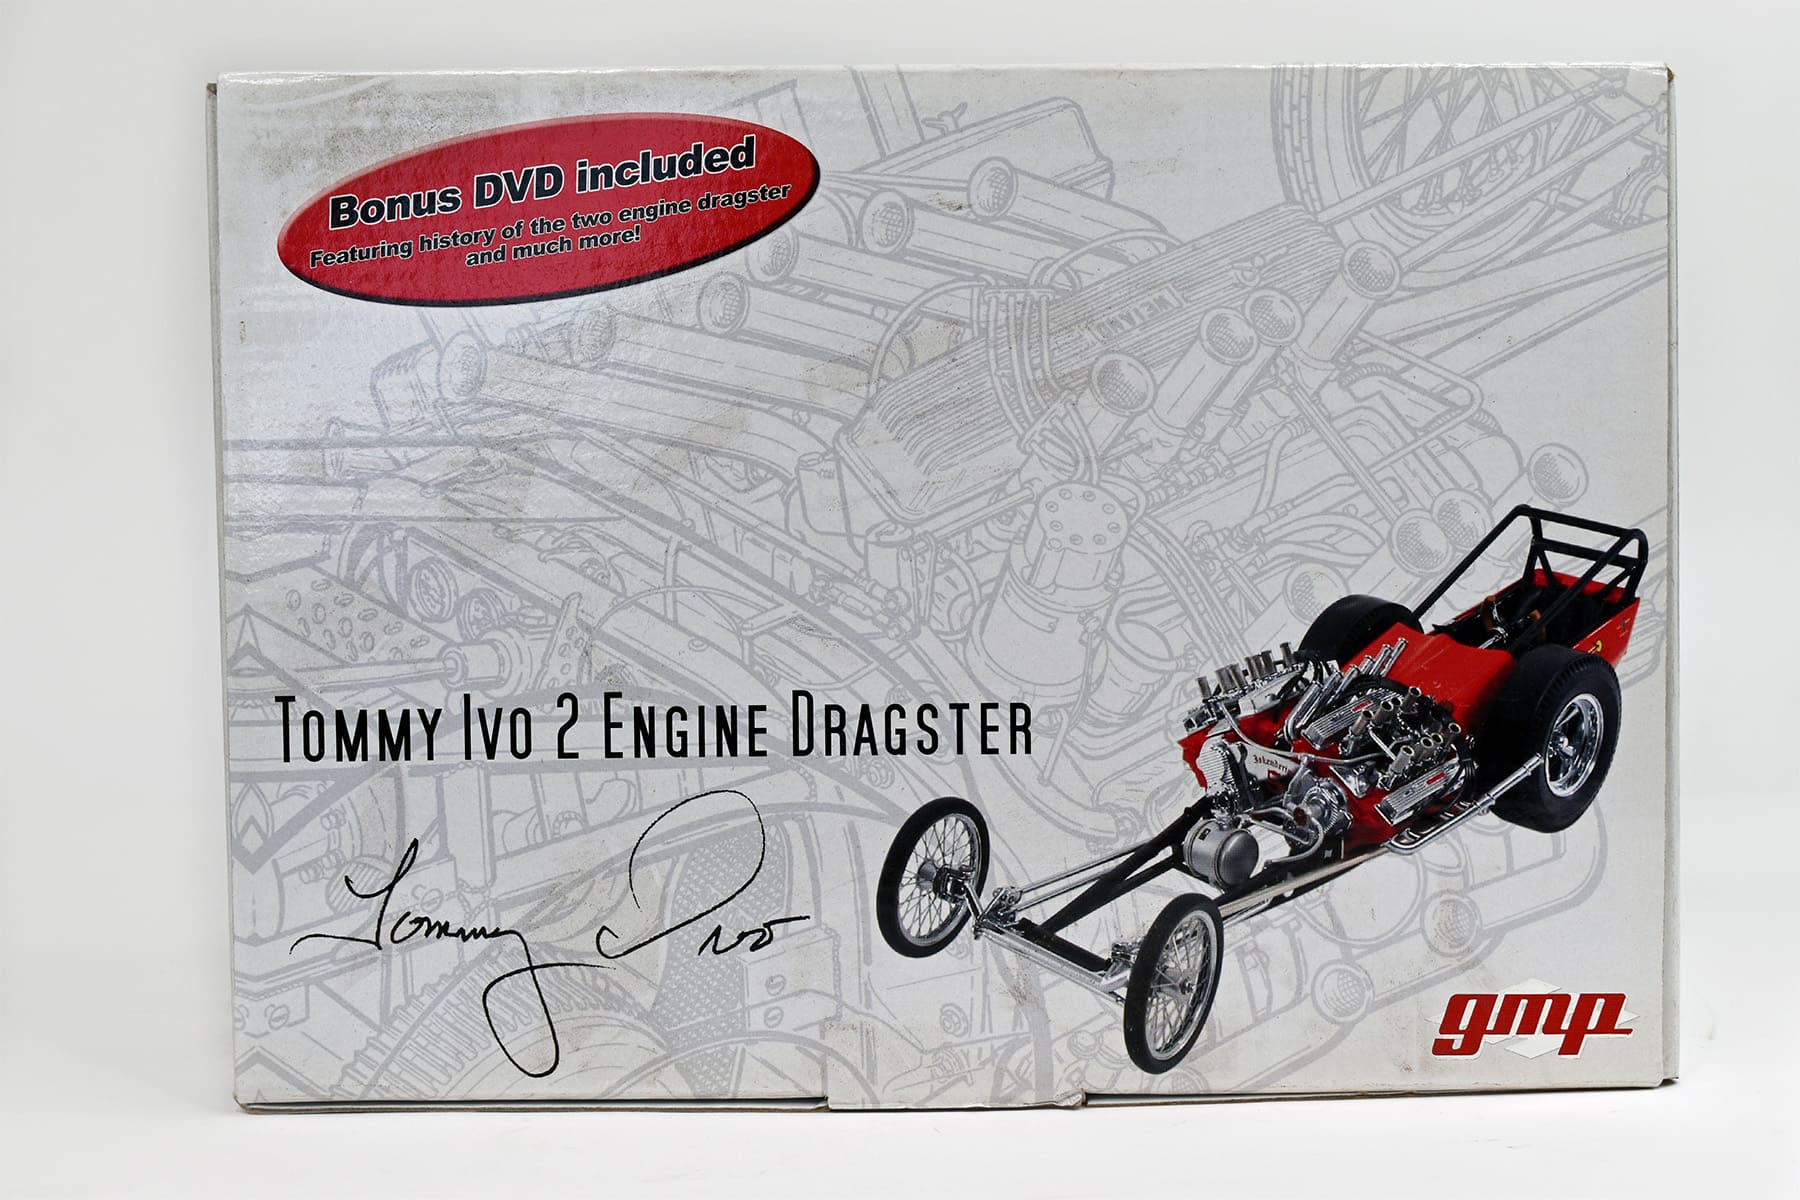 Tommy Ivo 2 engine dragster